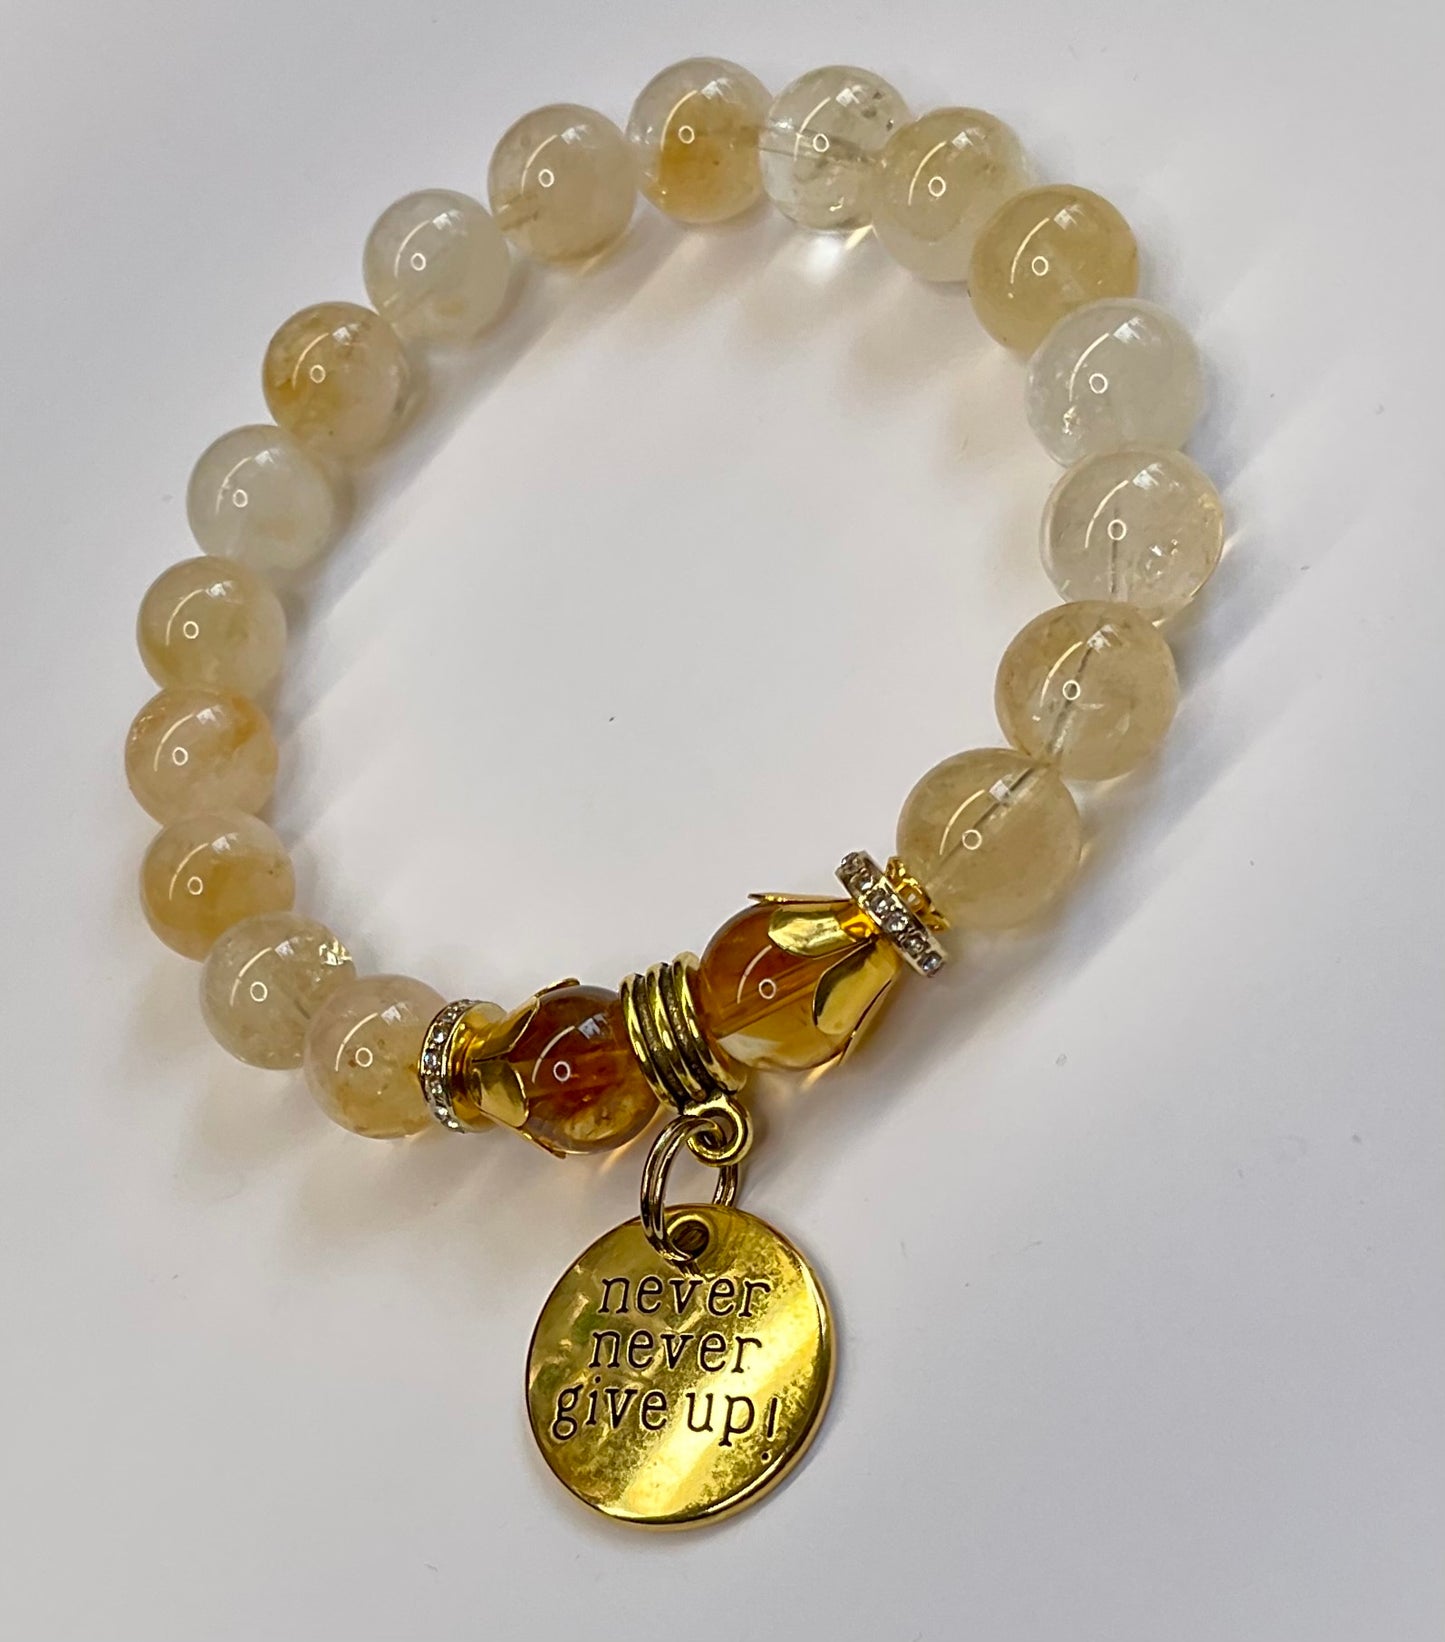 Citrine with “Never Never Give Up” Dangle Charm